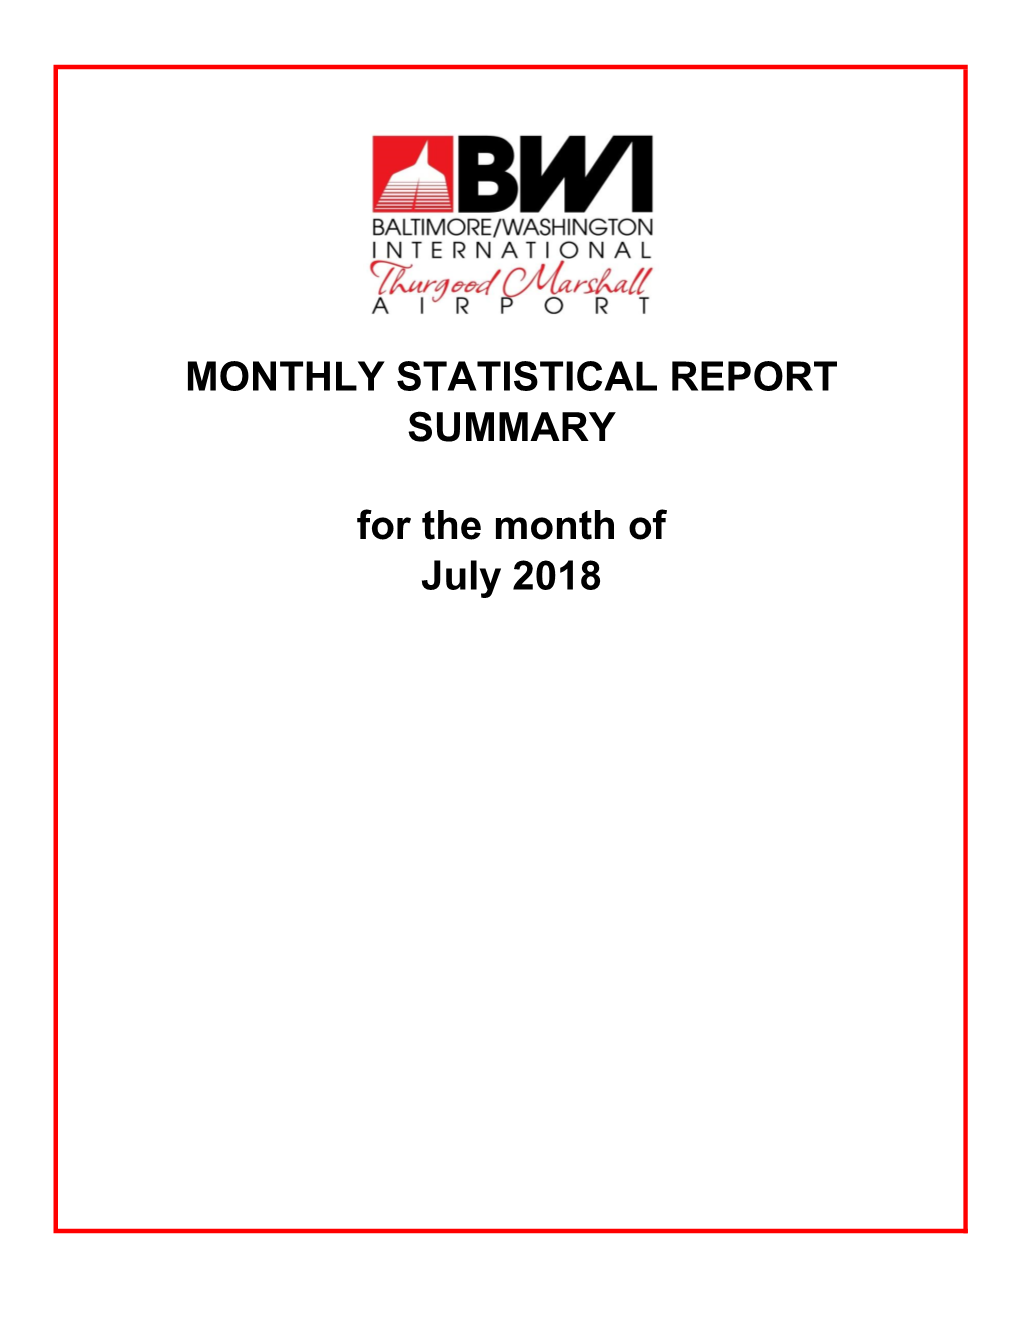 MONTHLY STATISTICAL REPORT for the Month Of